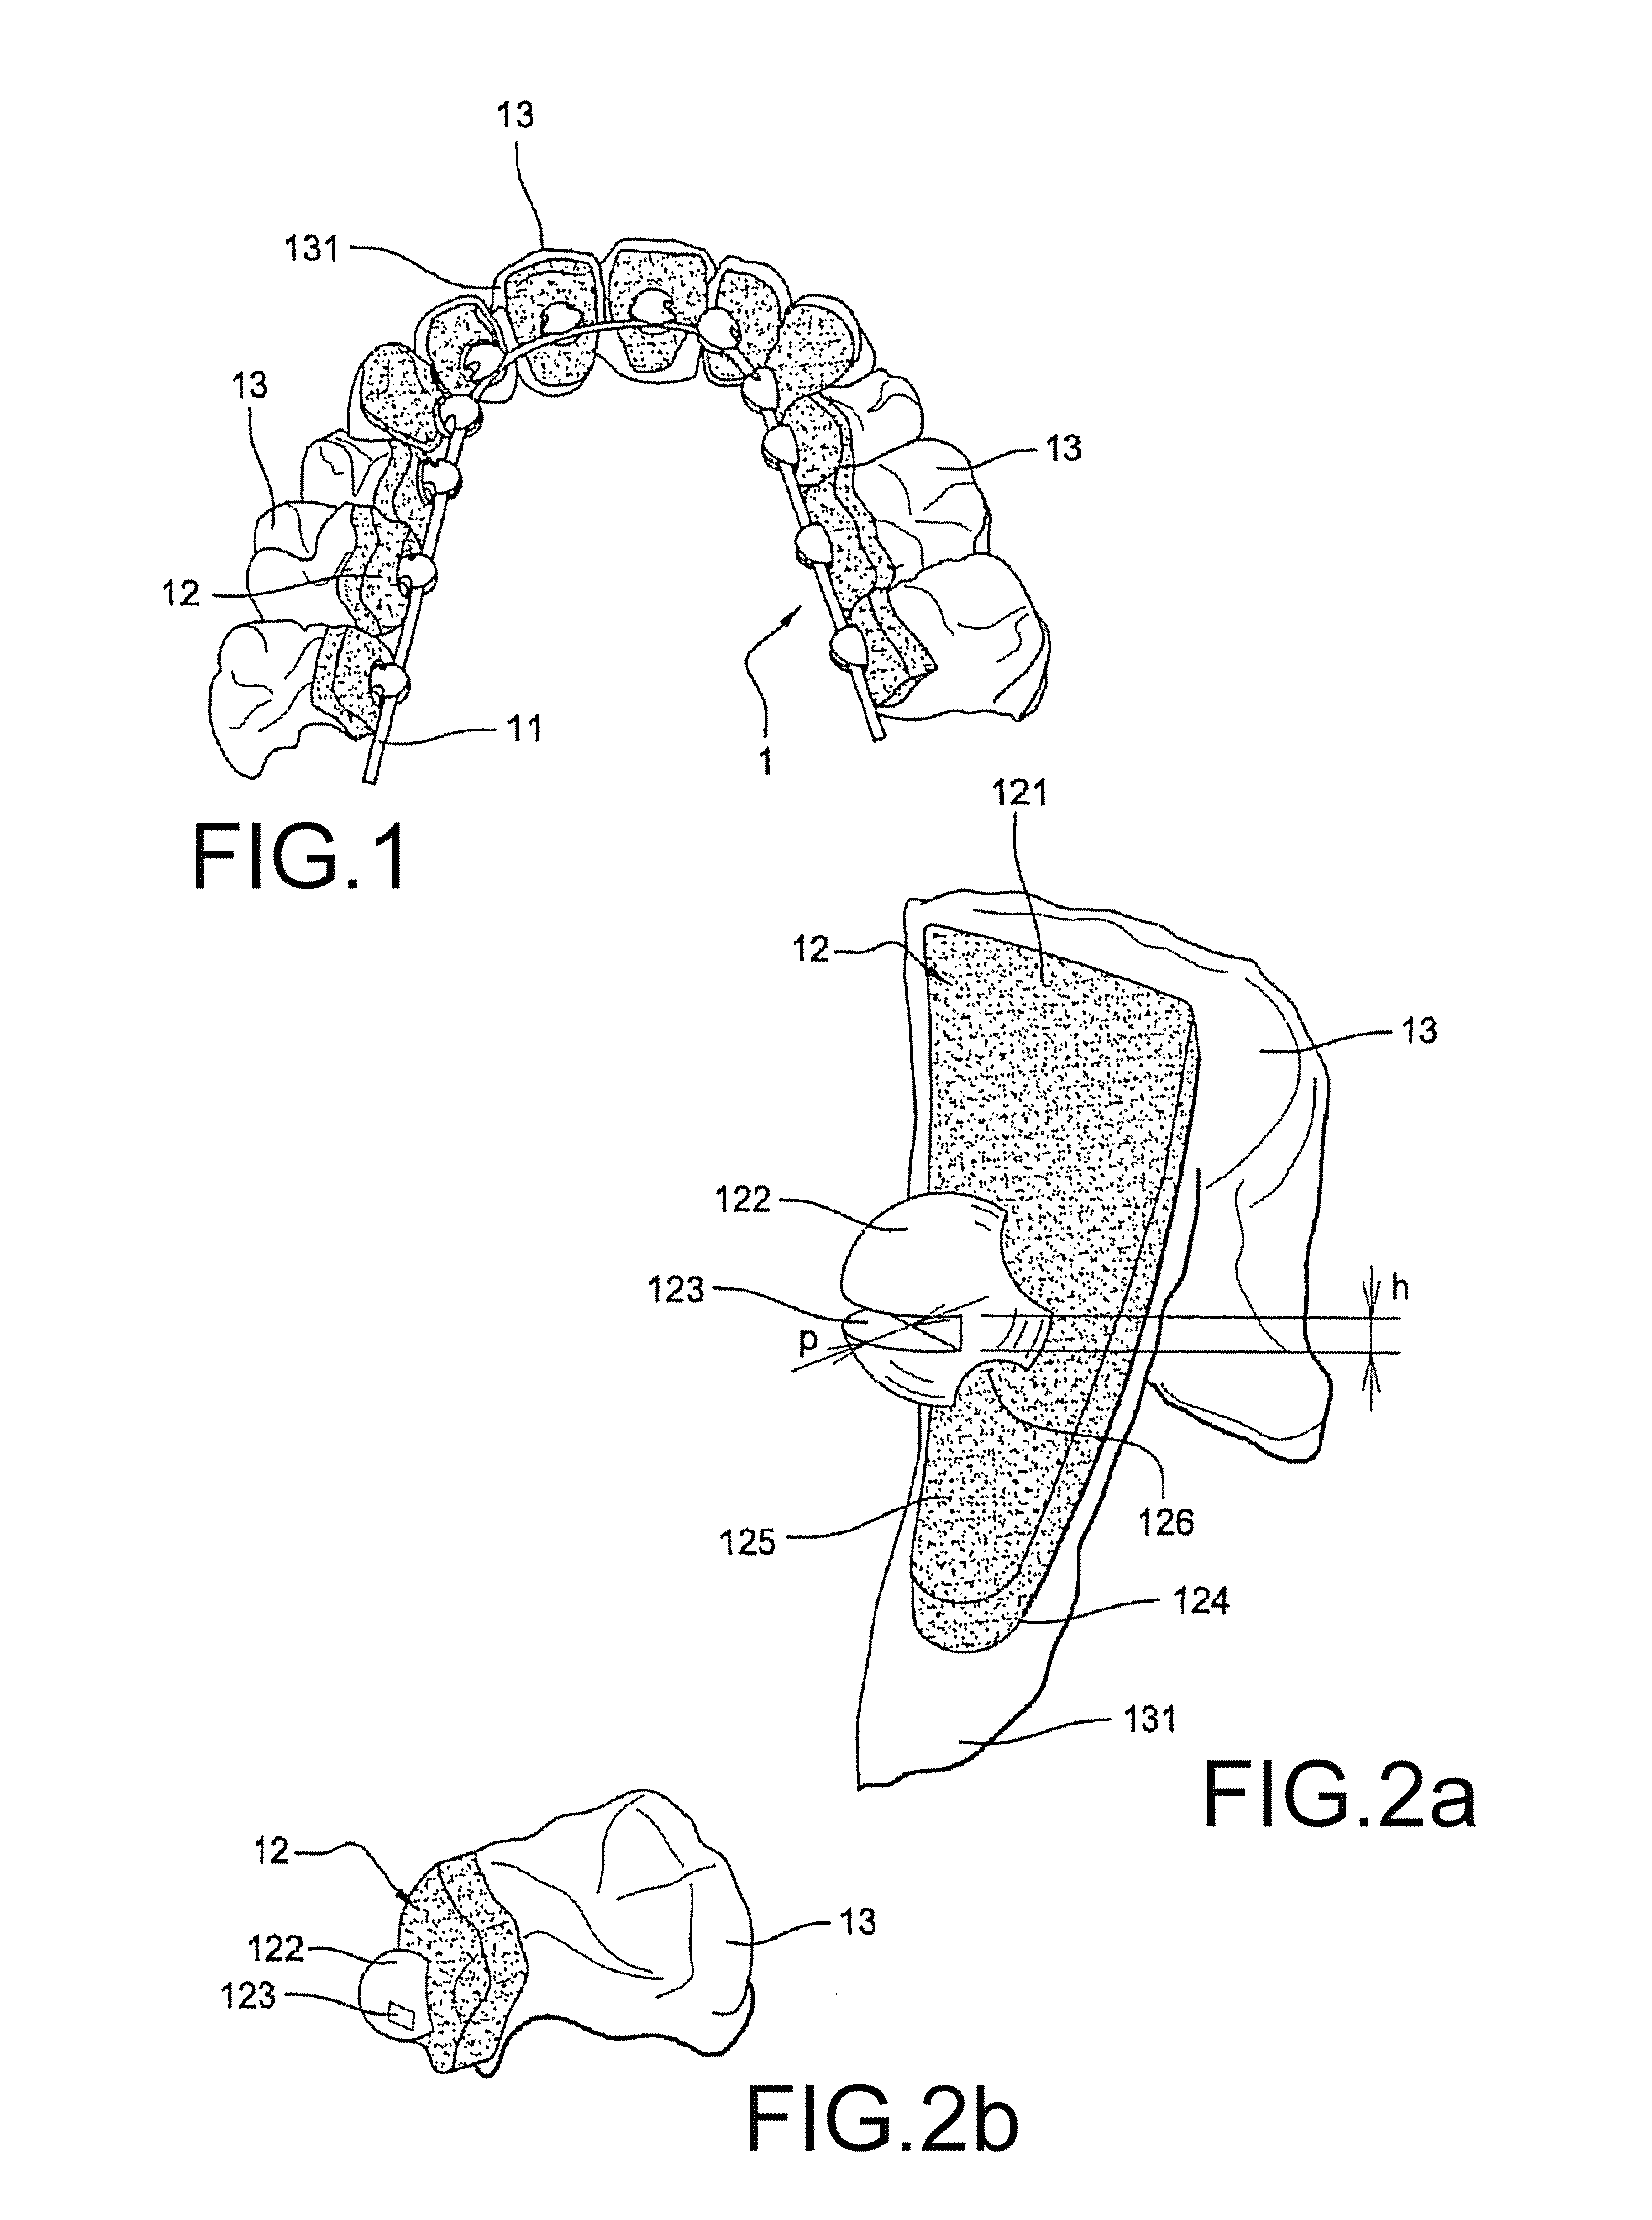 Method for producing a customized orthodontic appliance